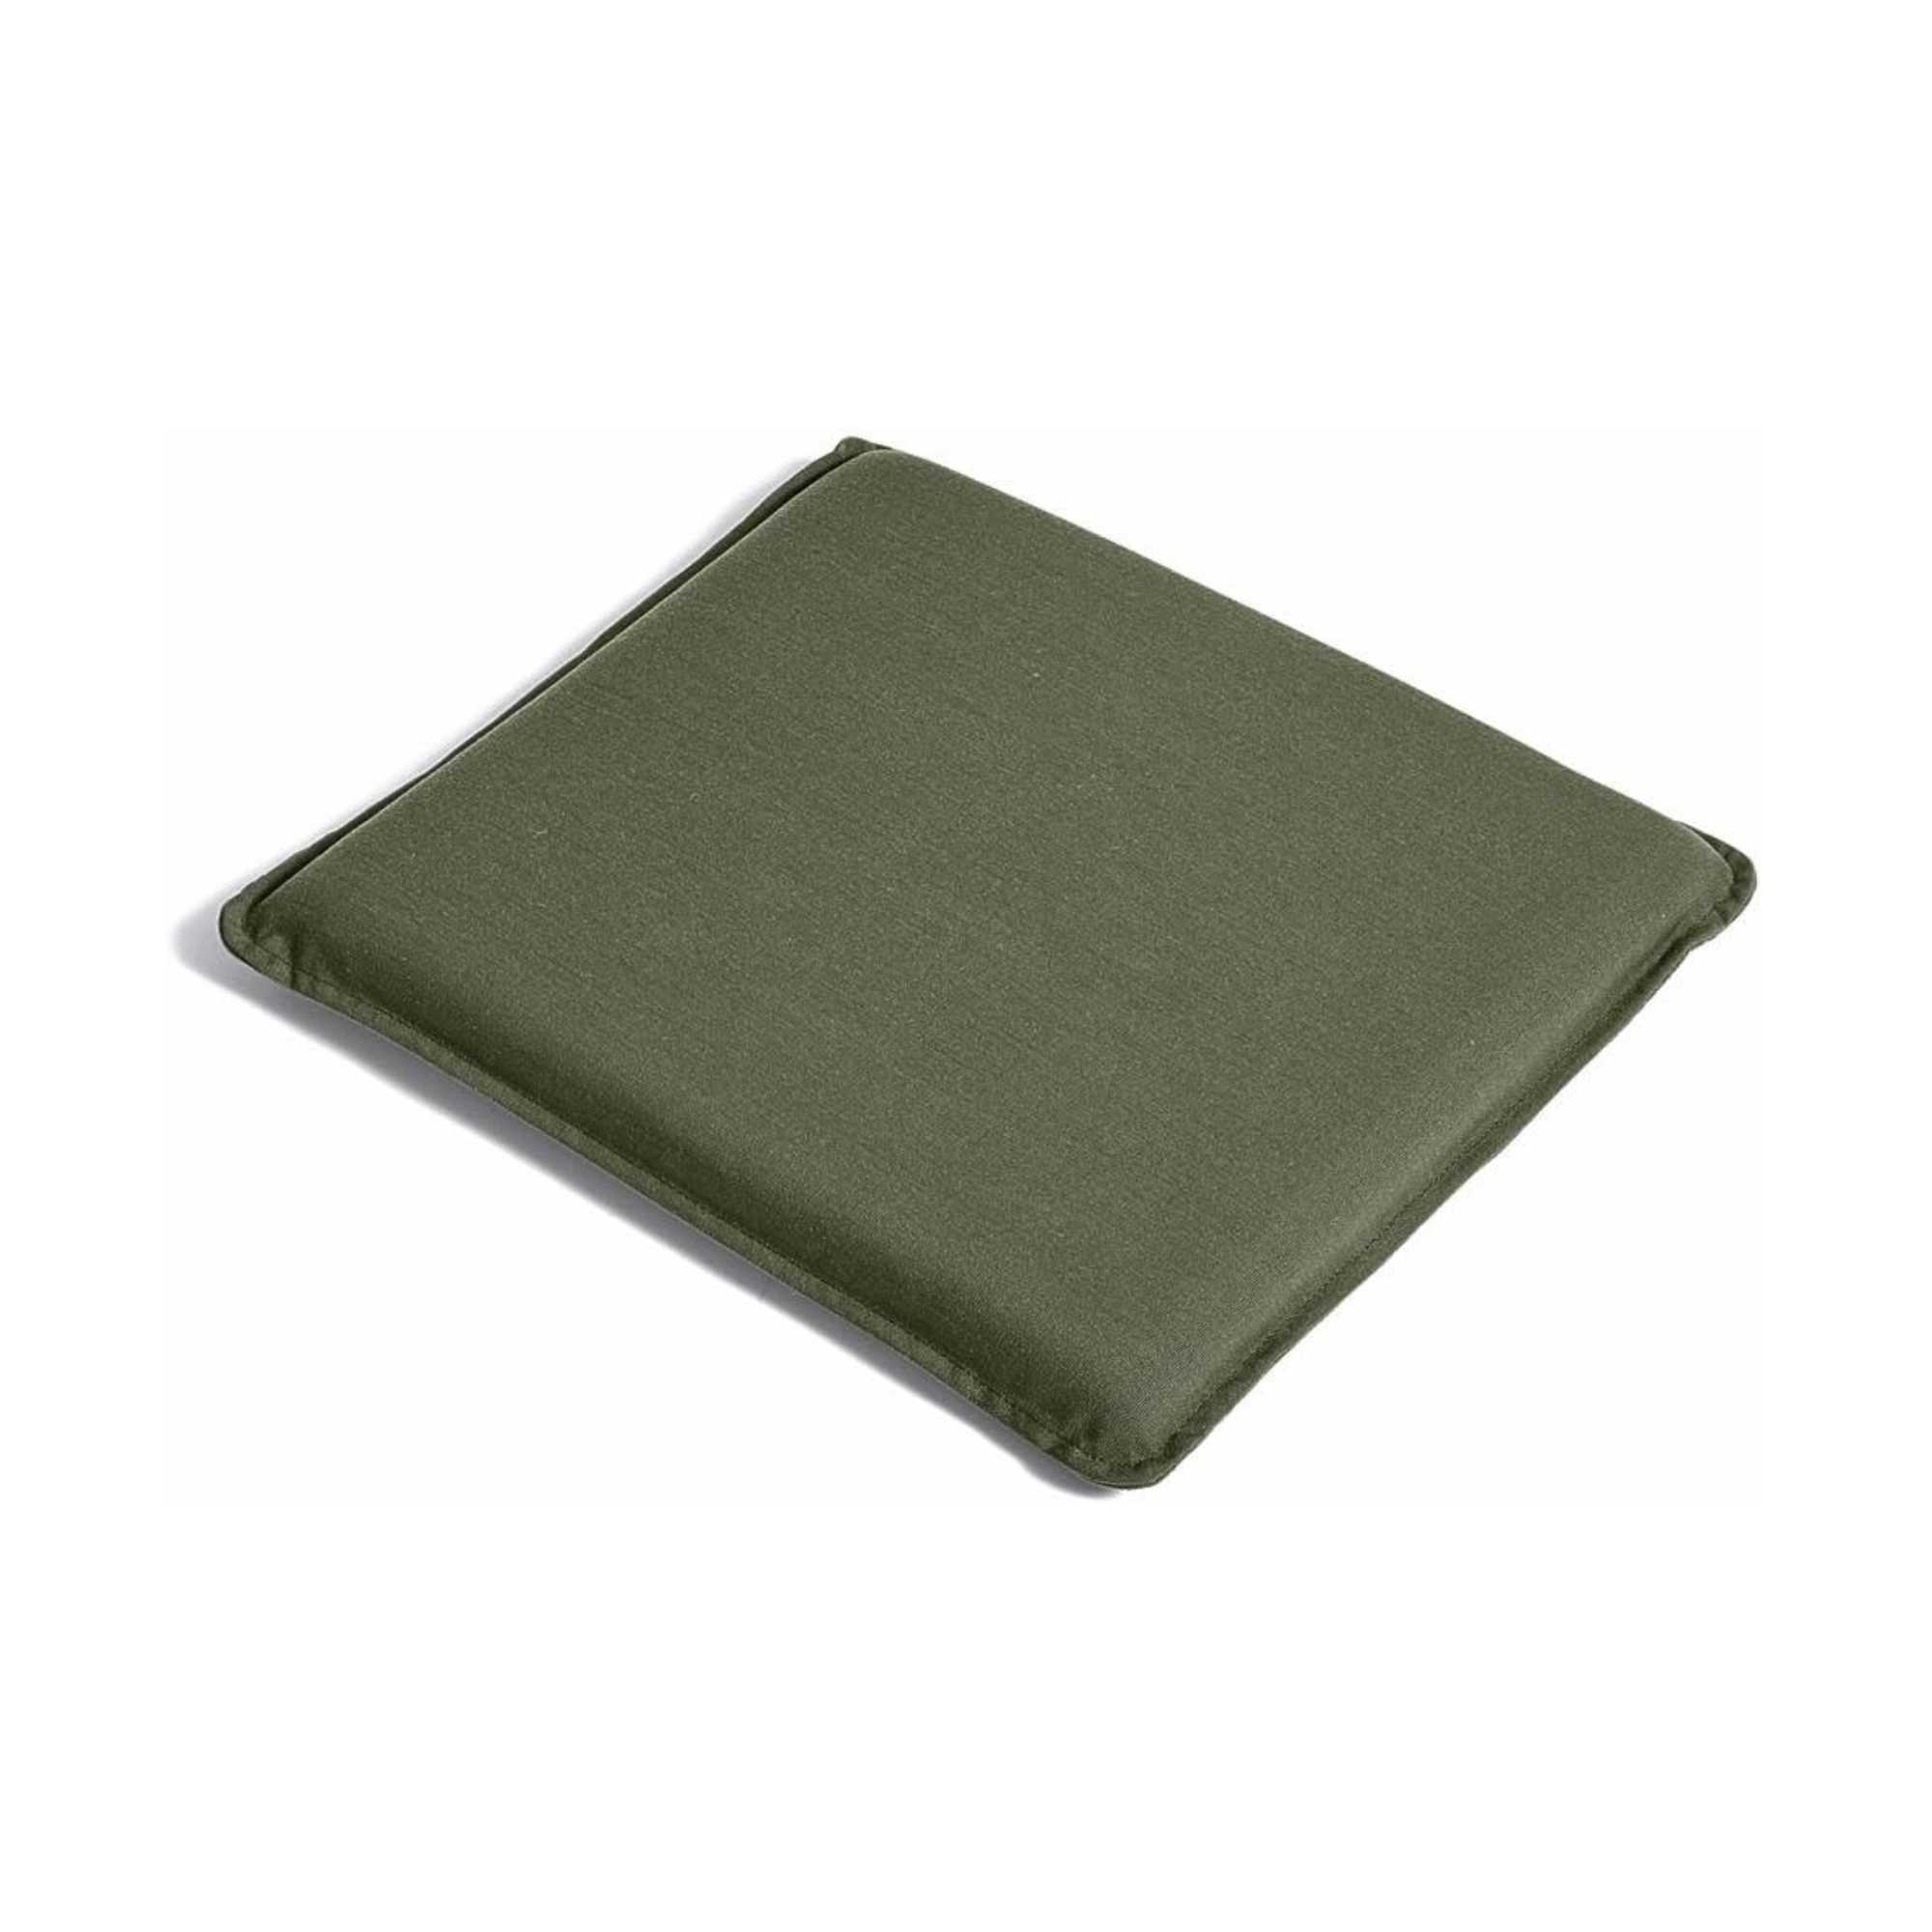 Hay Palissade seat pad cushion (for chair & armchair), olive